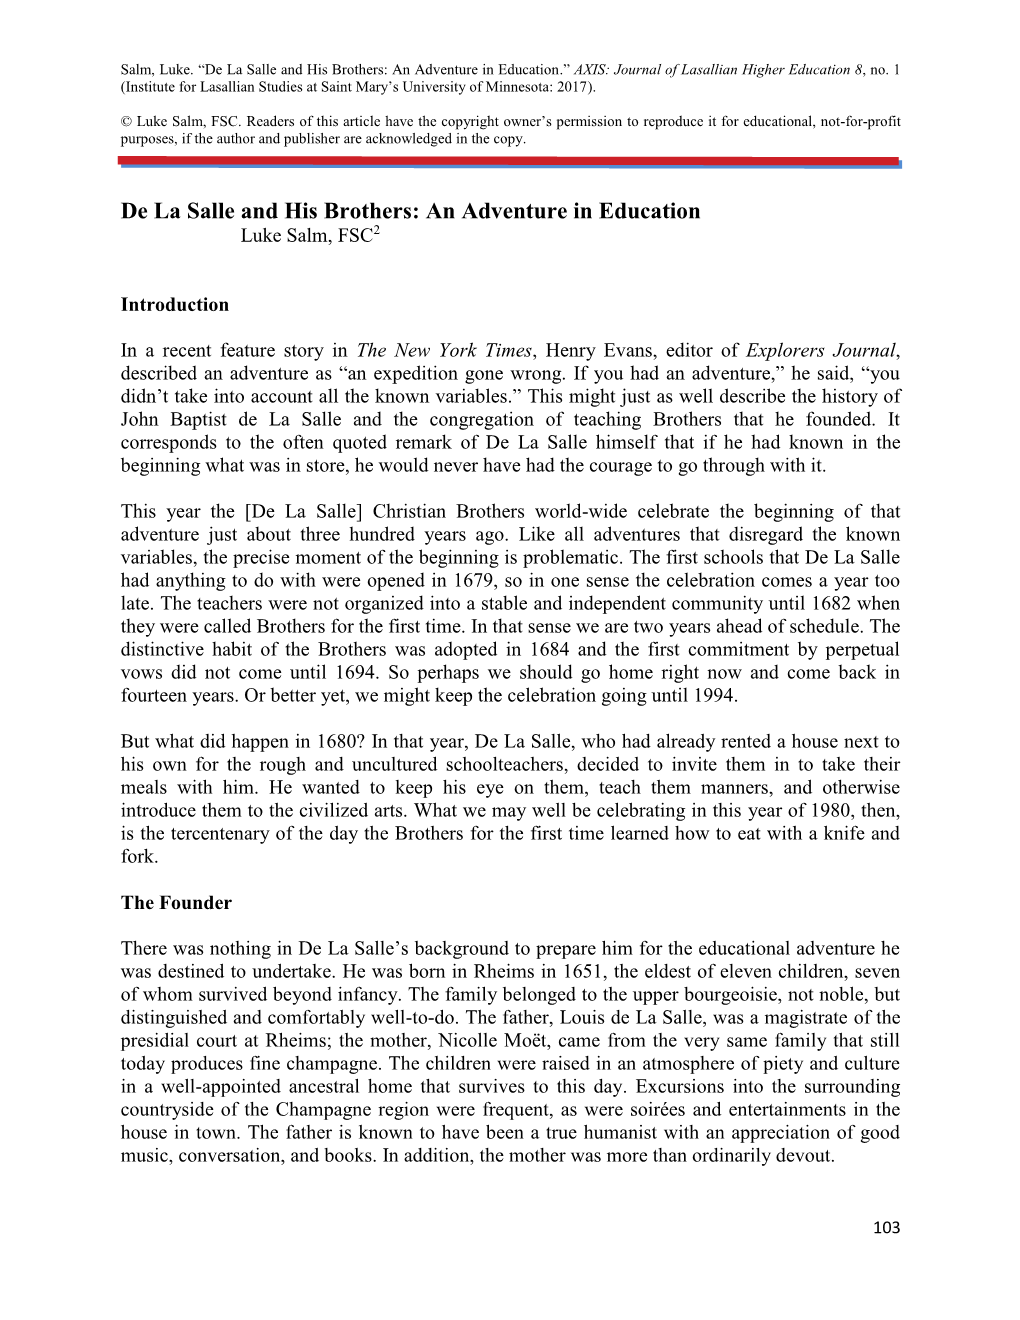 De La Salle and His Brothers: an Adventure in Education.” AXIS: Journal of Lasallian Higher Education 8, No